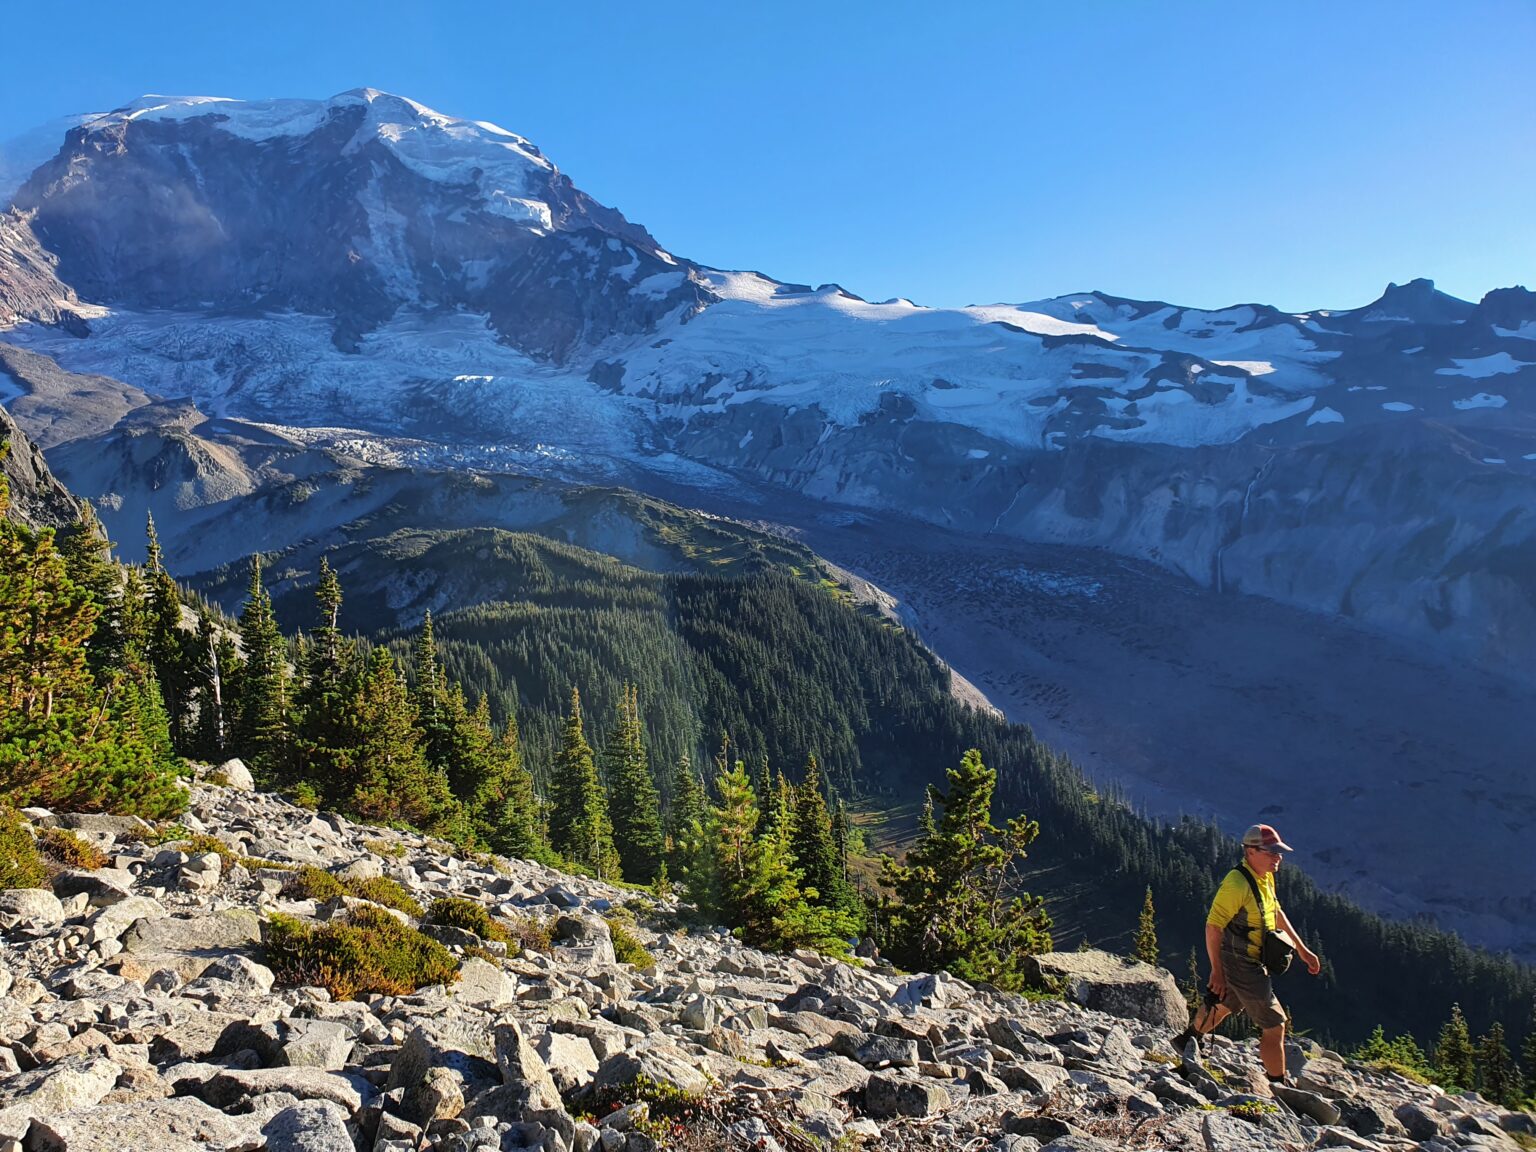 an unobstructed view of Mount Rainier